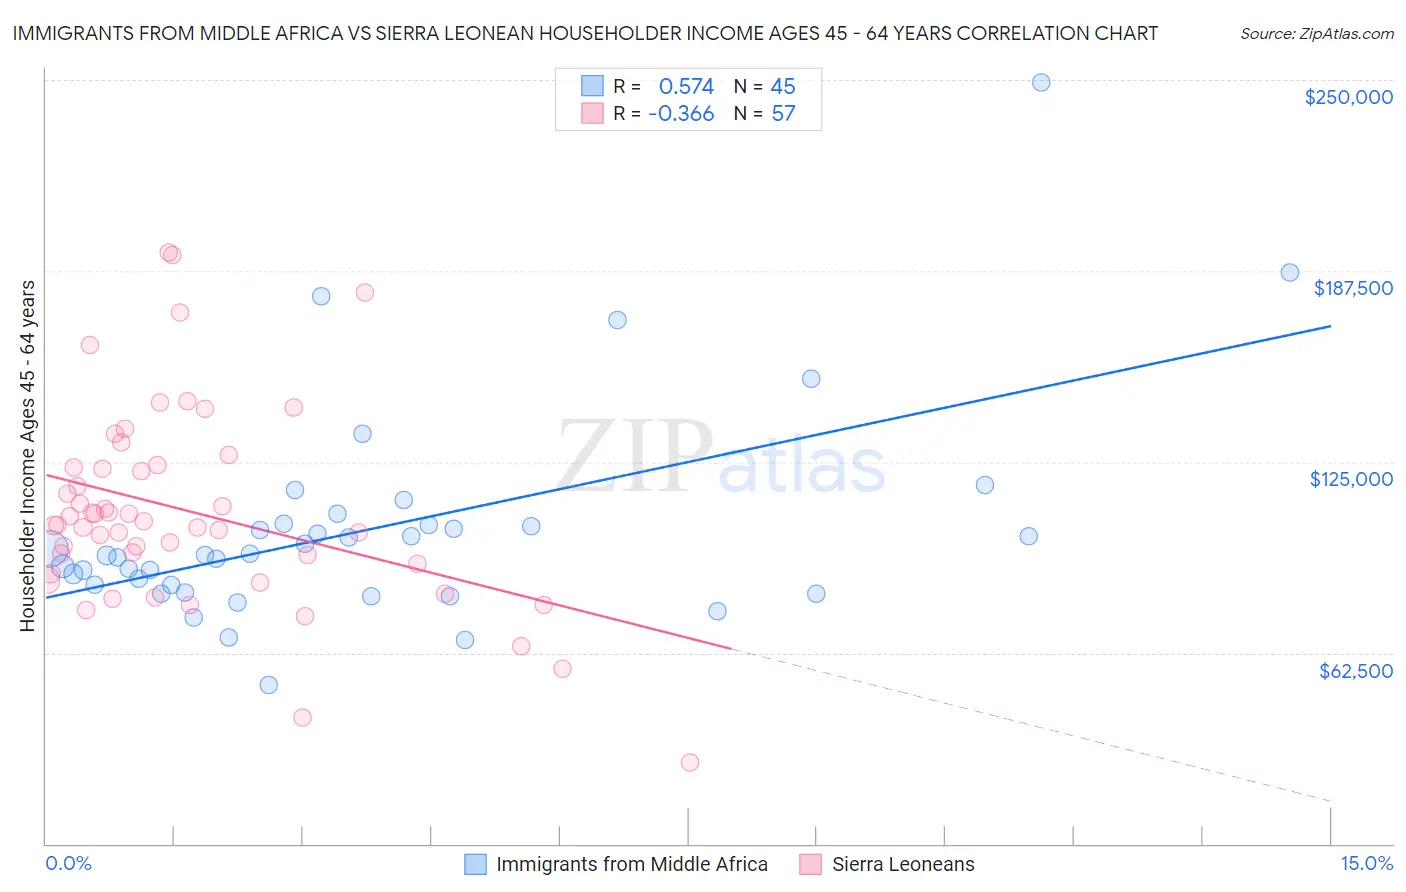 Immigrants from Middle Africa vs Sierra Leonean Householder Income Ages 45 - 64 years